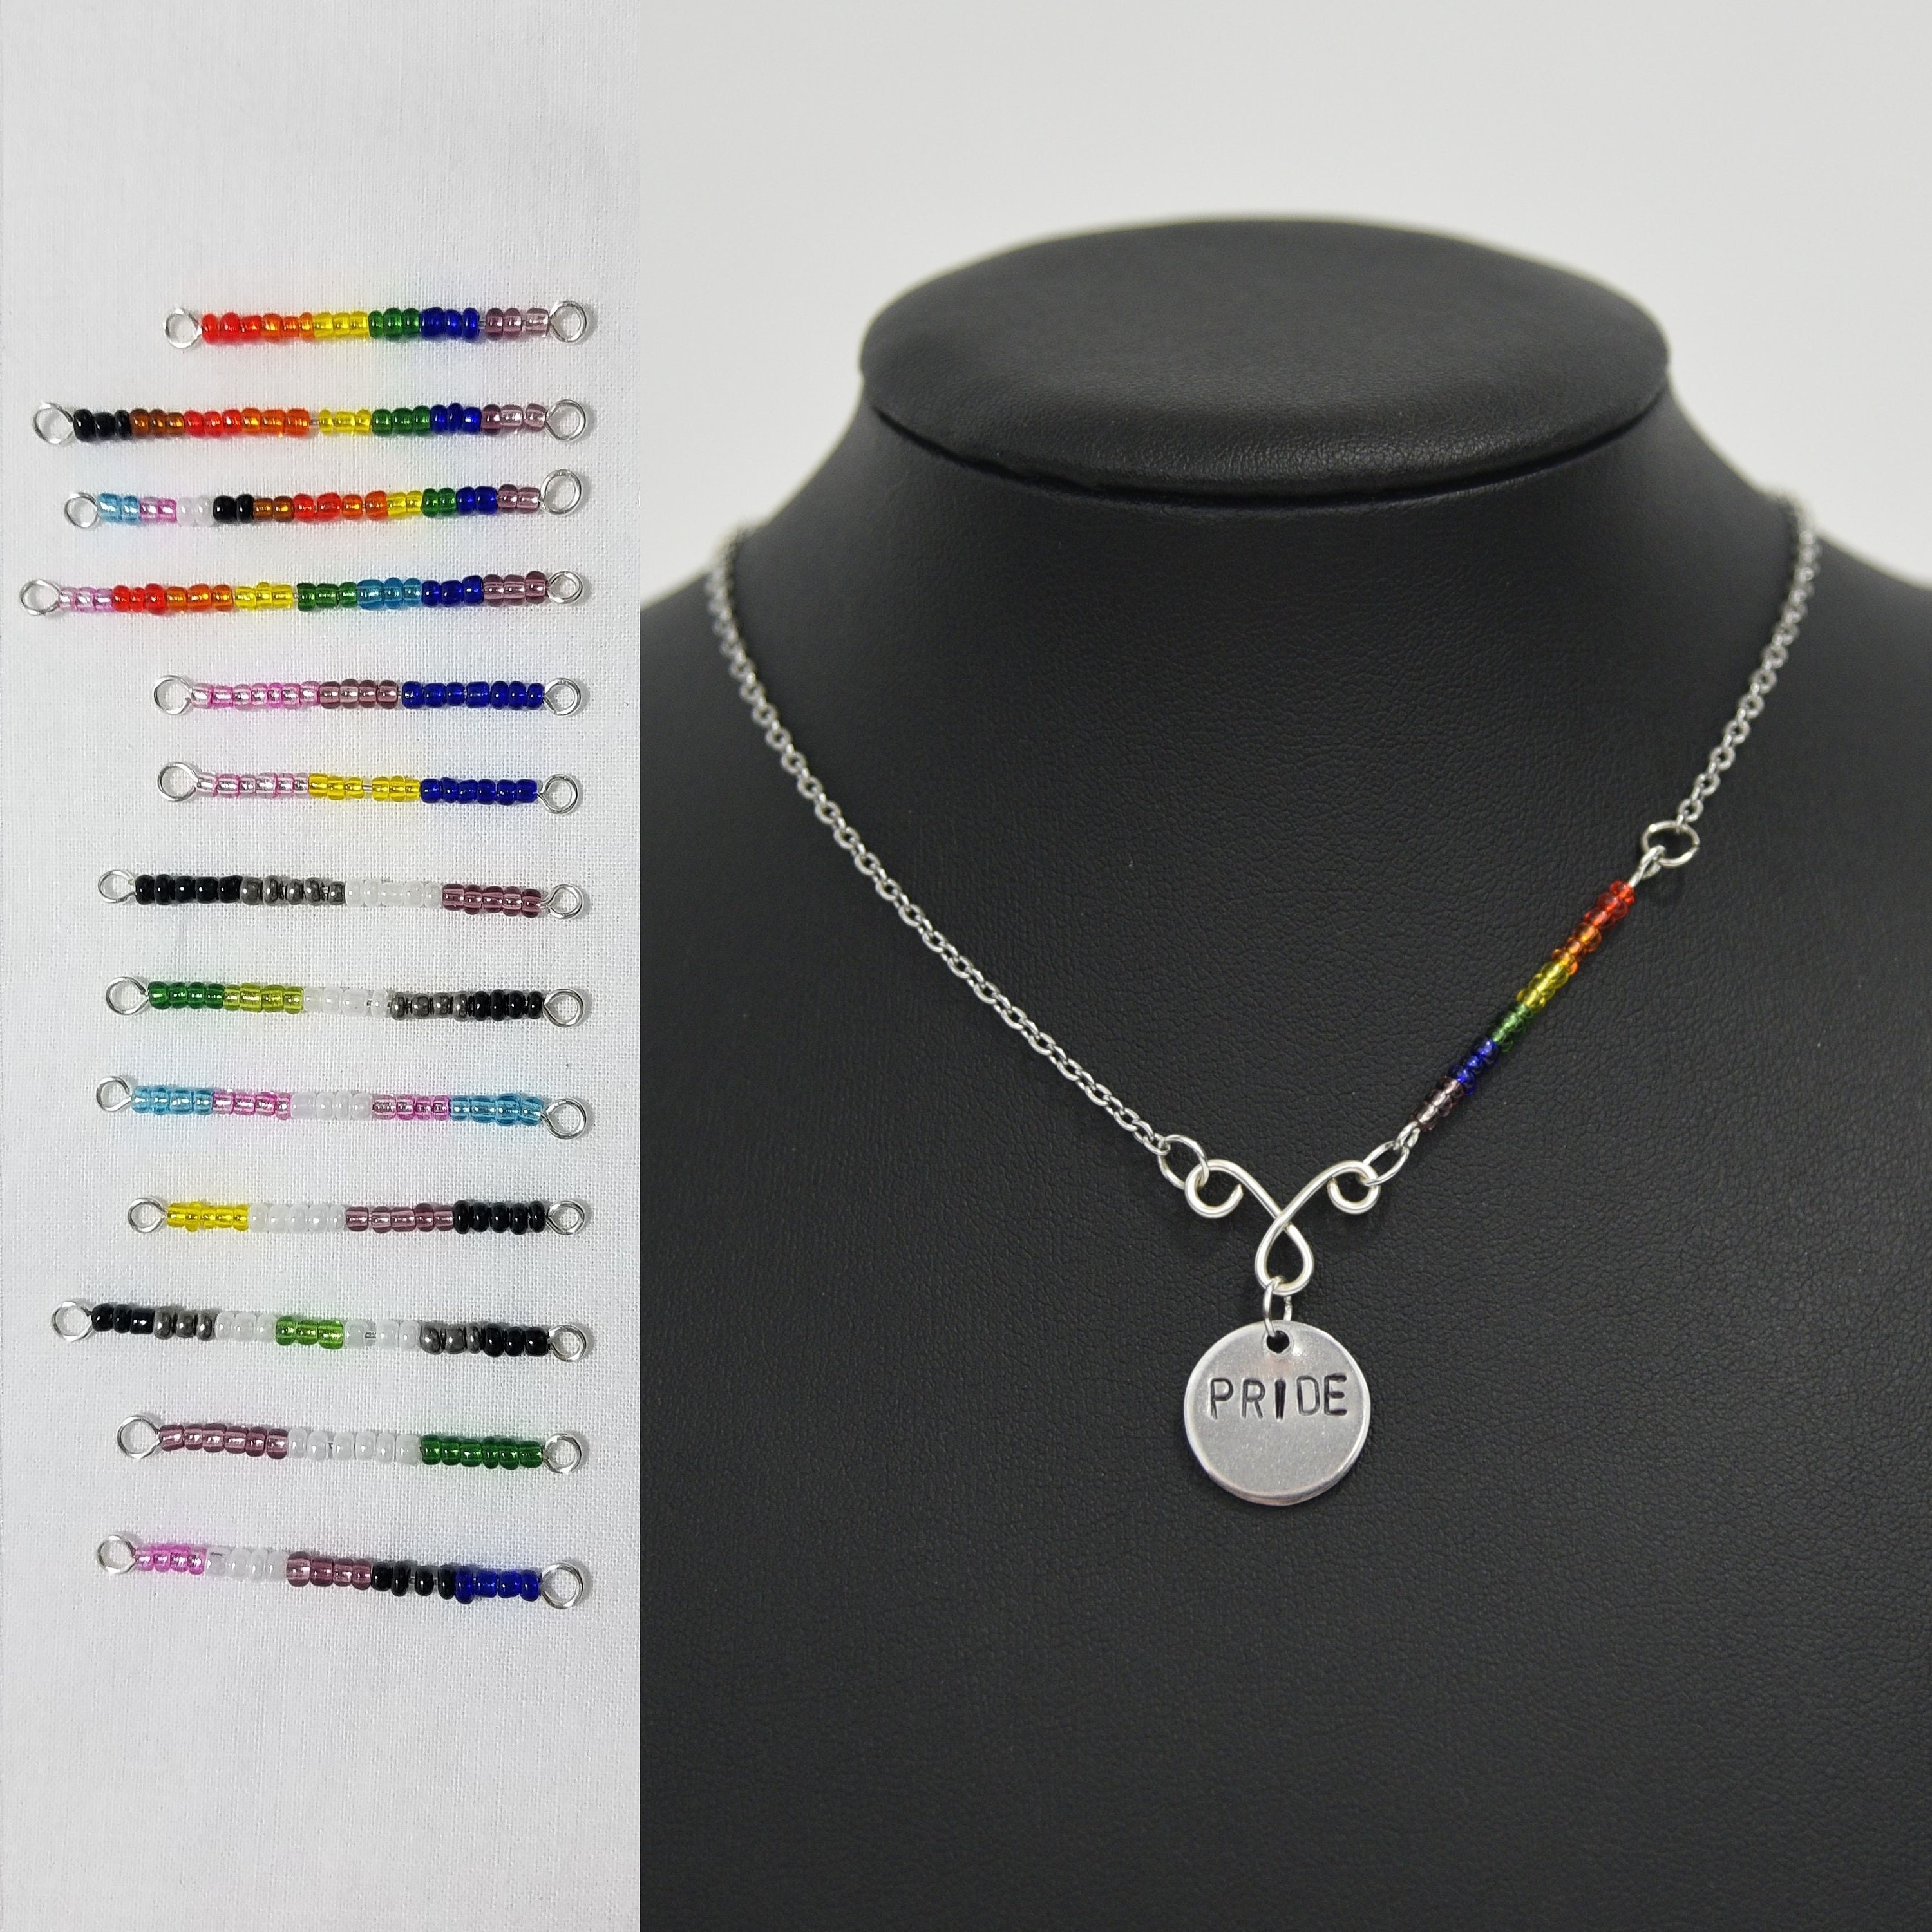 Minimalist Handmade Jewelry Subtle LGBT Present Personalized Charm Pendant Crystal LGBTQ Pride Flag Silver Bar Necklace Coming Out Gift